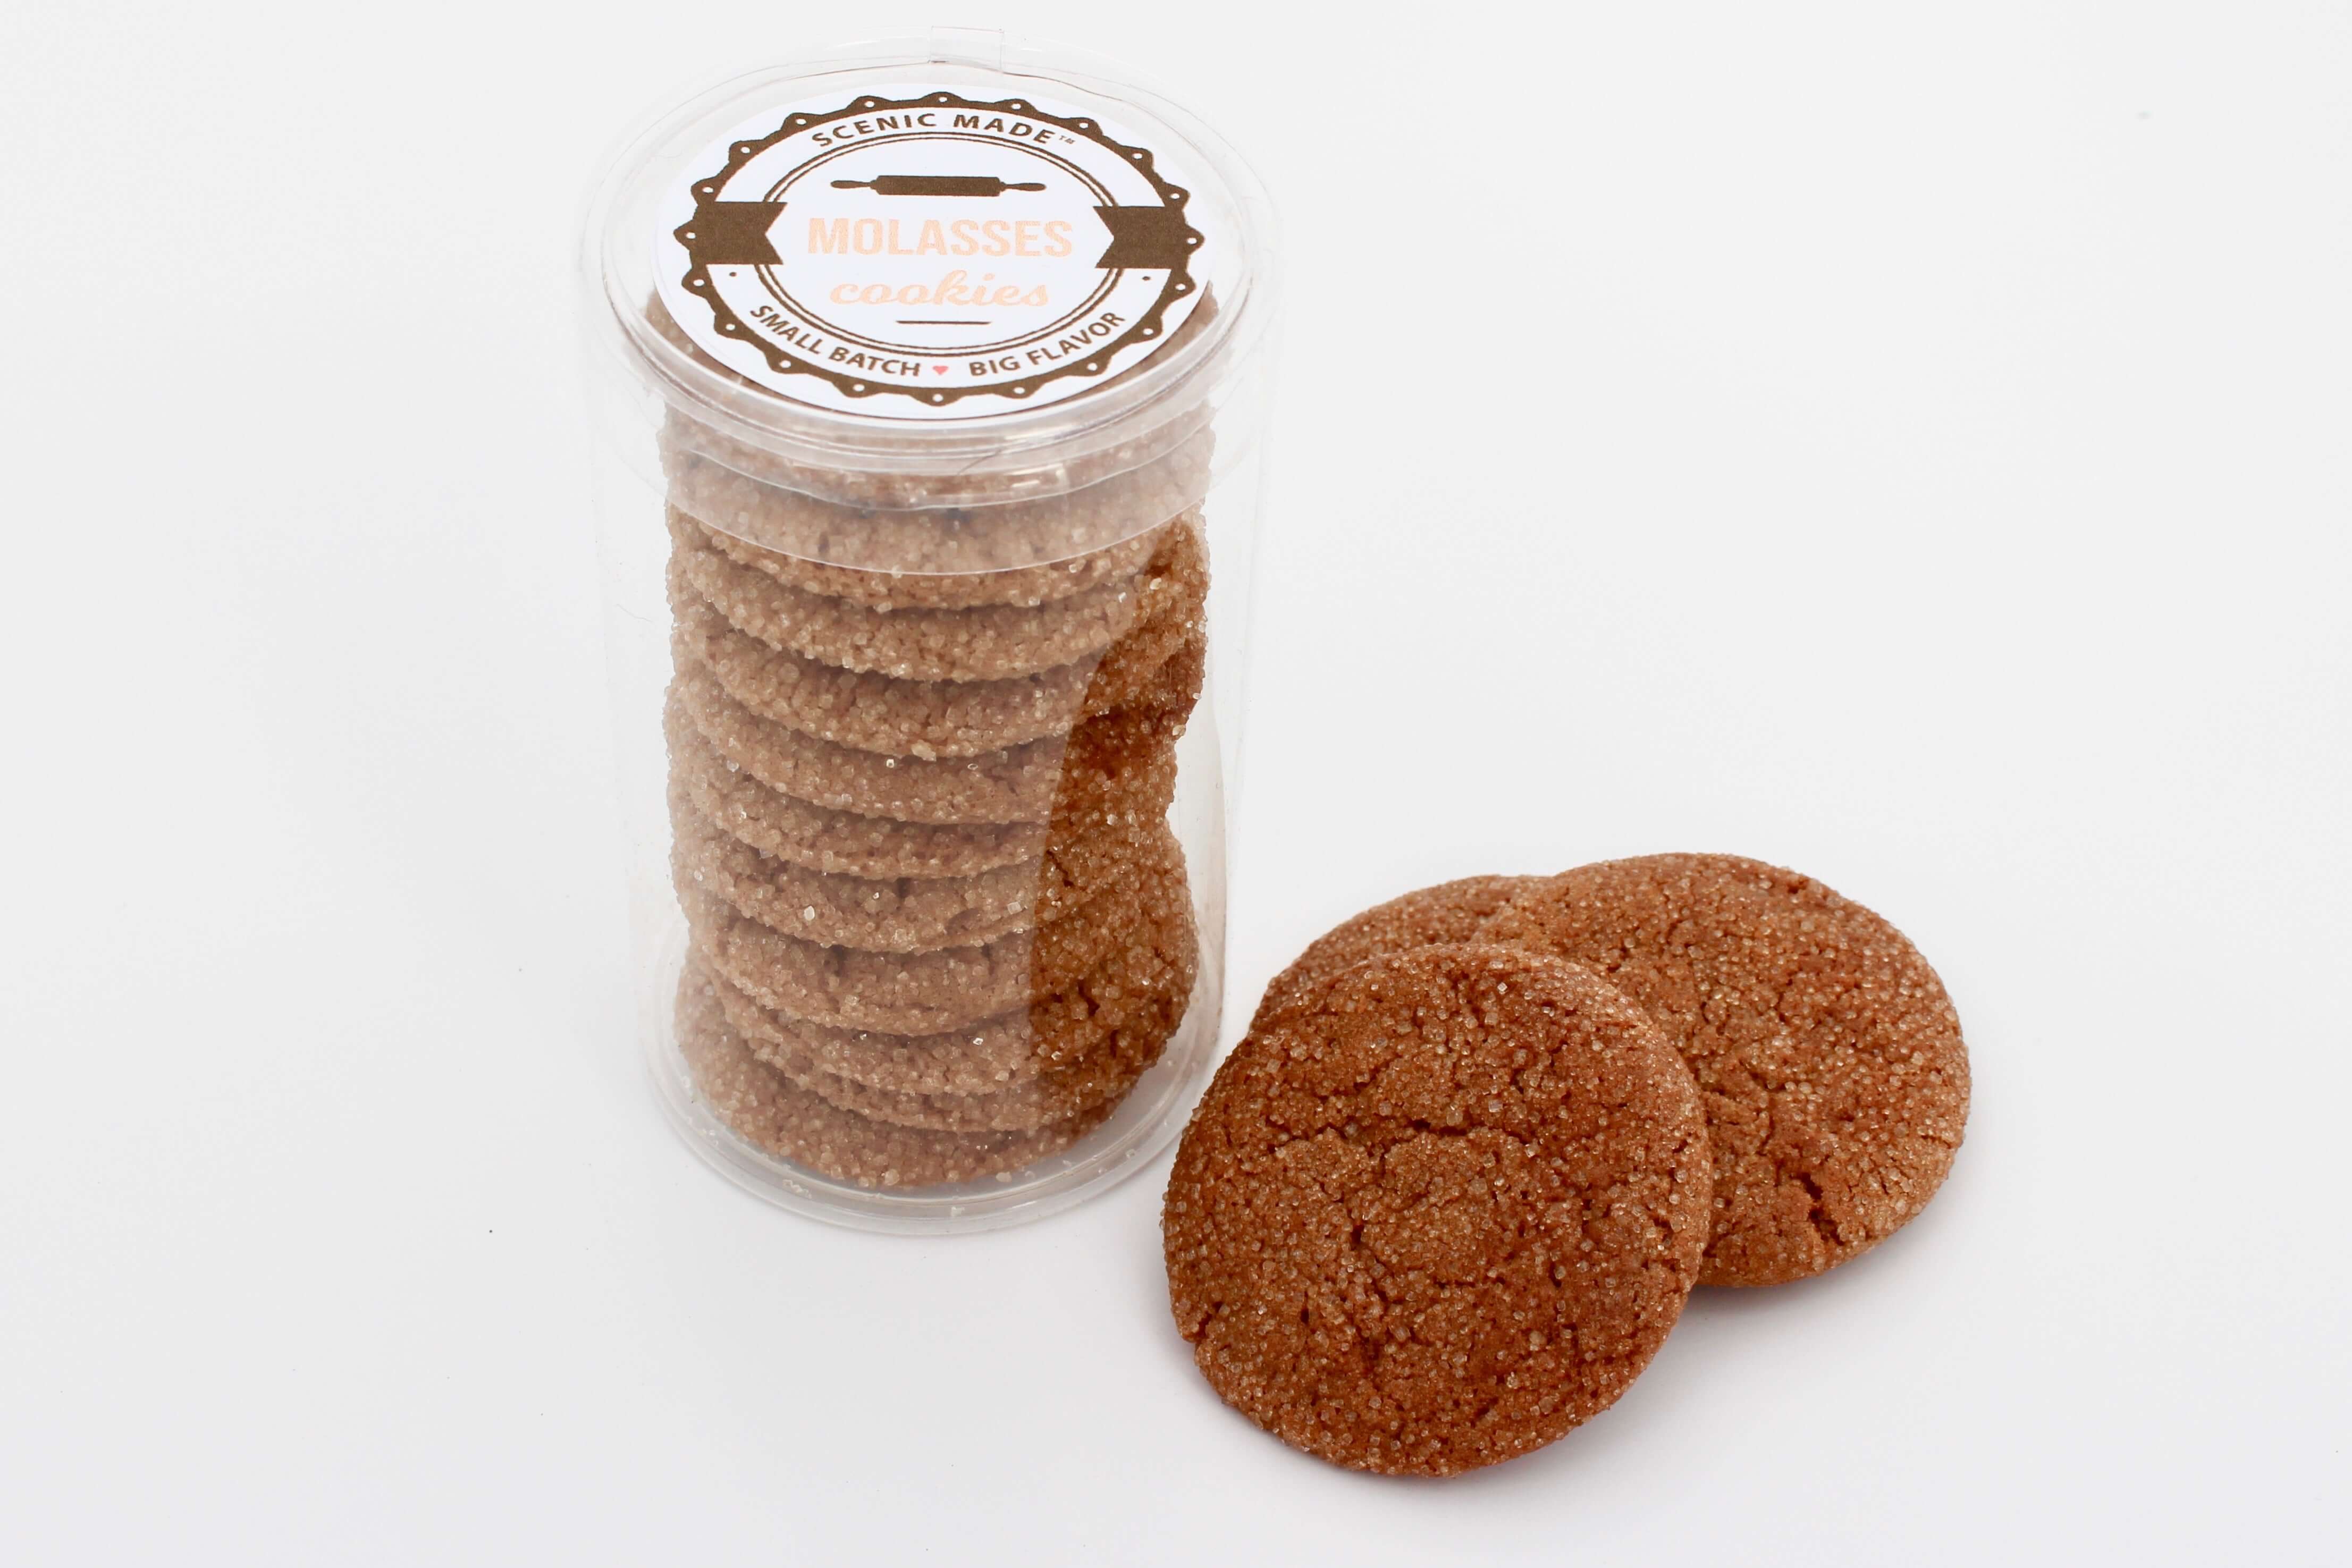 Molasses cookies. 10 cookies stacked in a clear, food safe container with an attractive label on top.